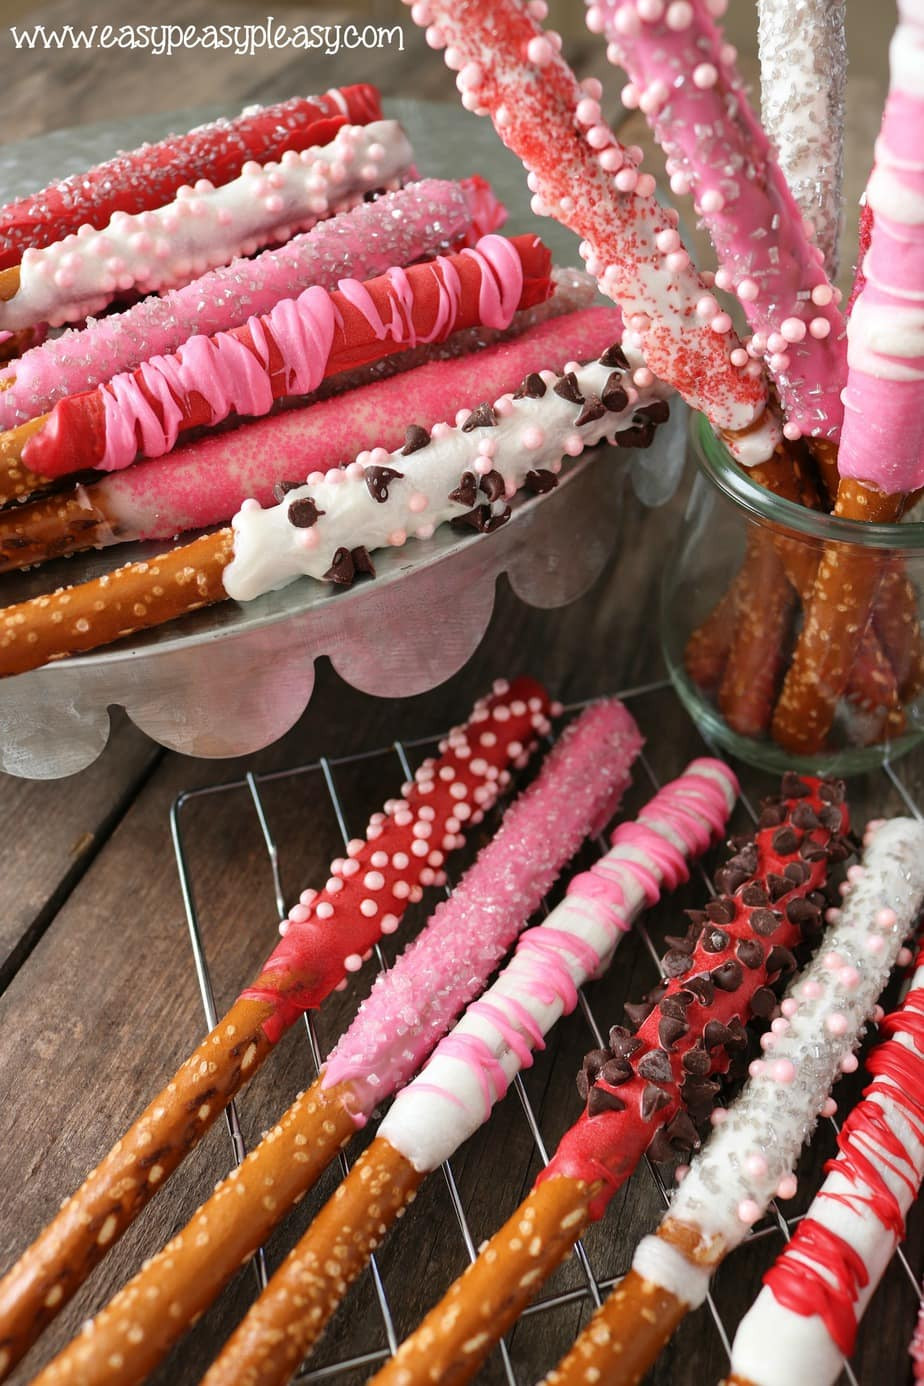 Chocolate Covered Pretzels For Valentines Day
 Make Valentine Day Special with Pretzel Rods Easy Peasy